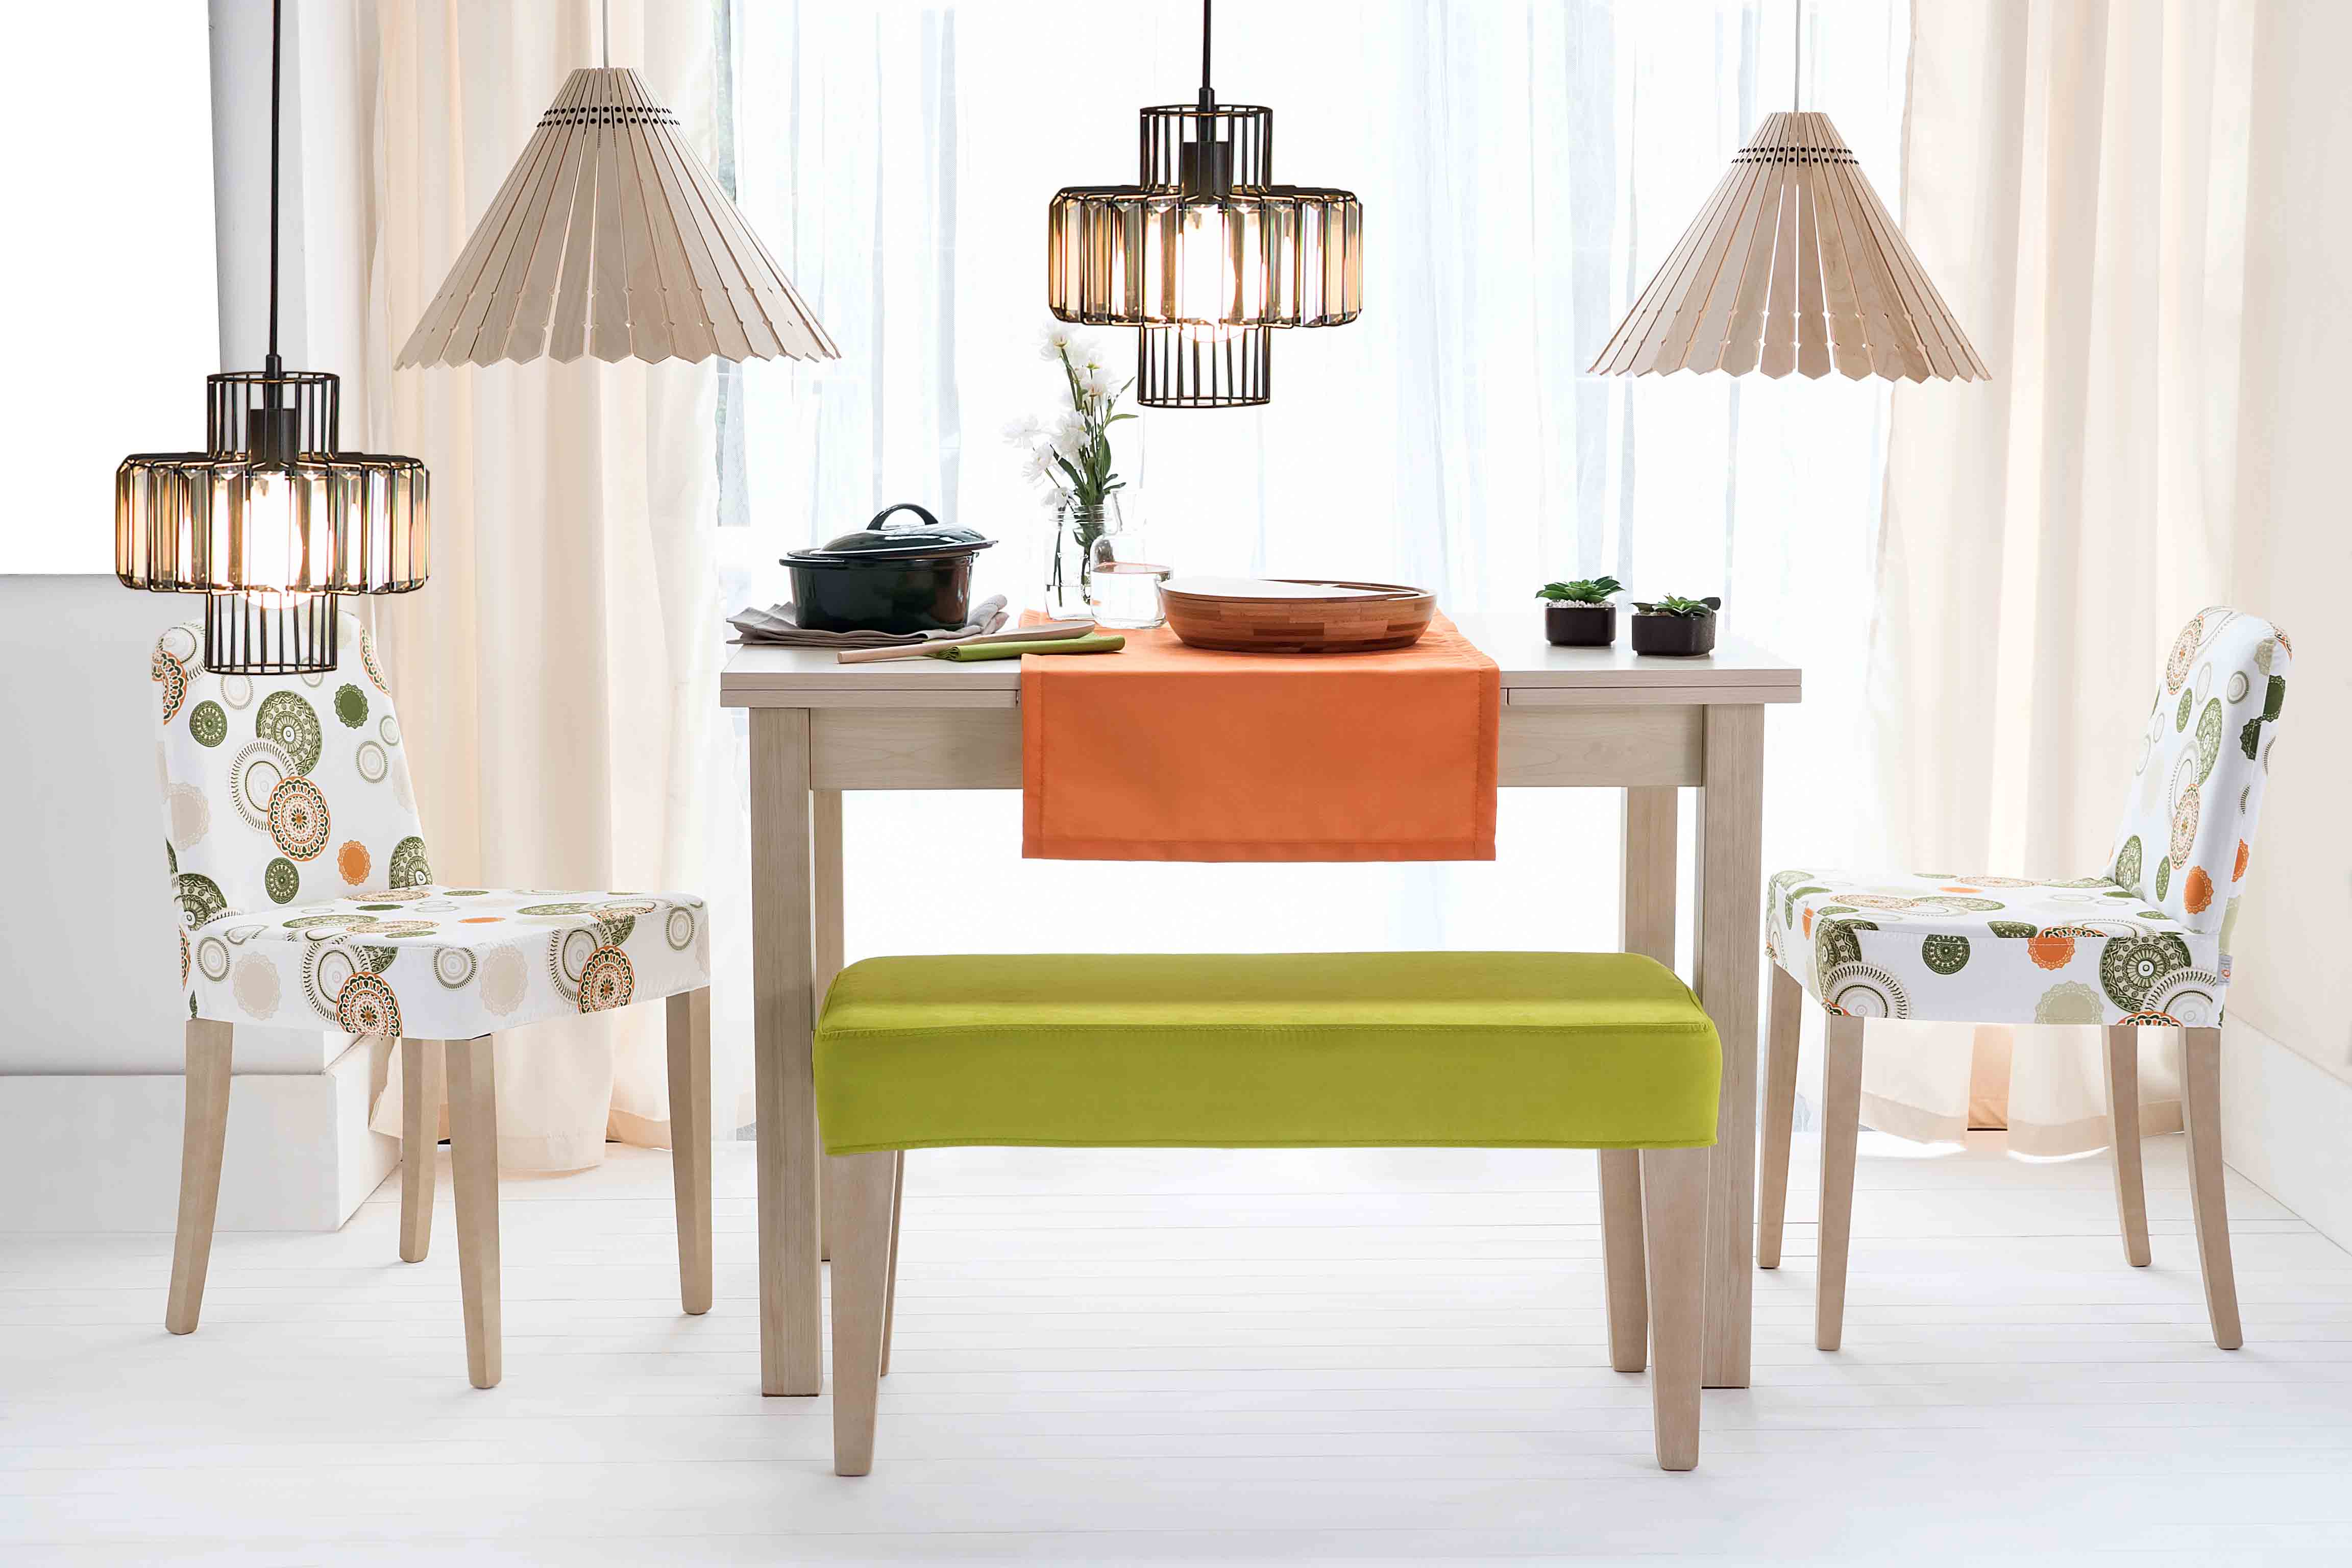 Lamps for Living Room Aesthetic- CenturyPly